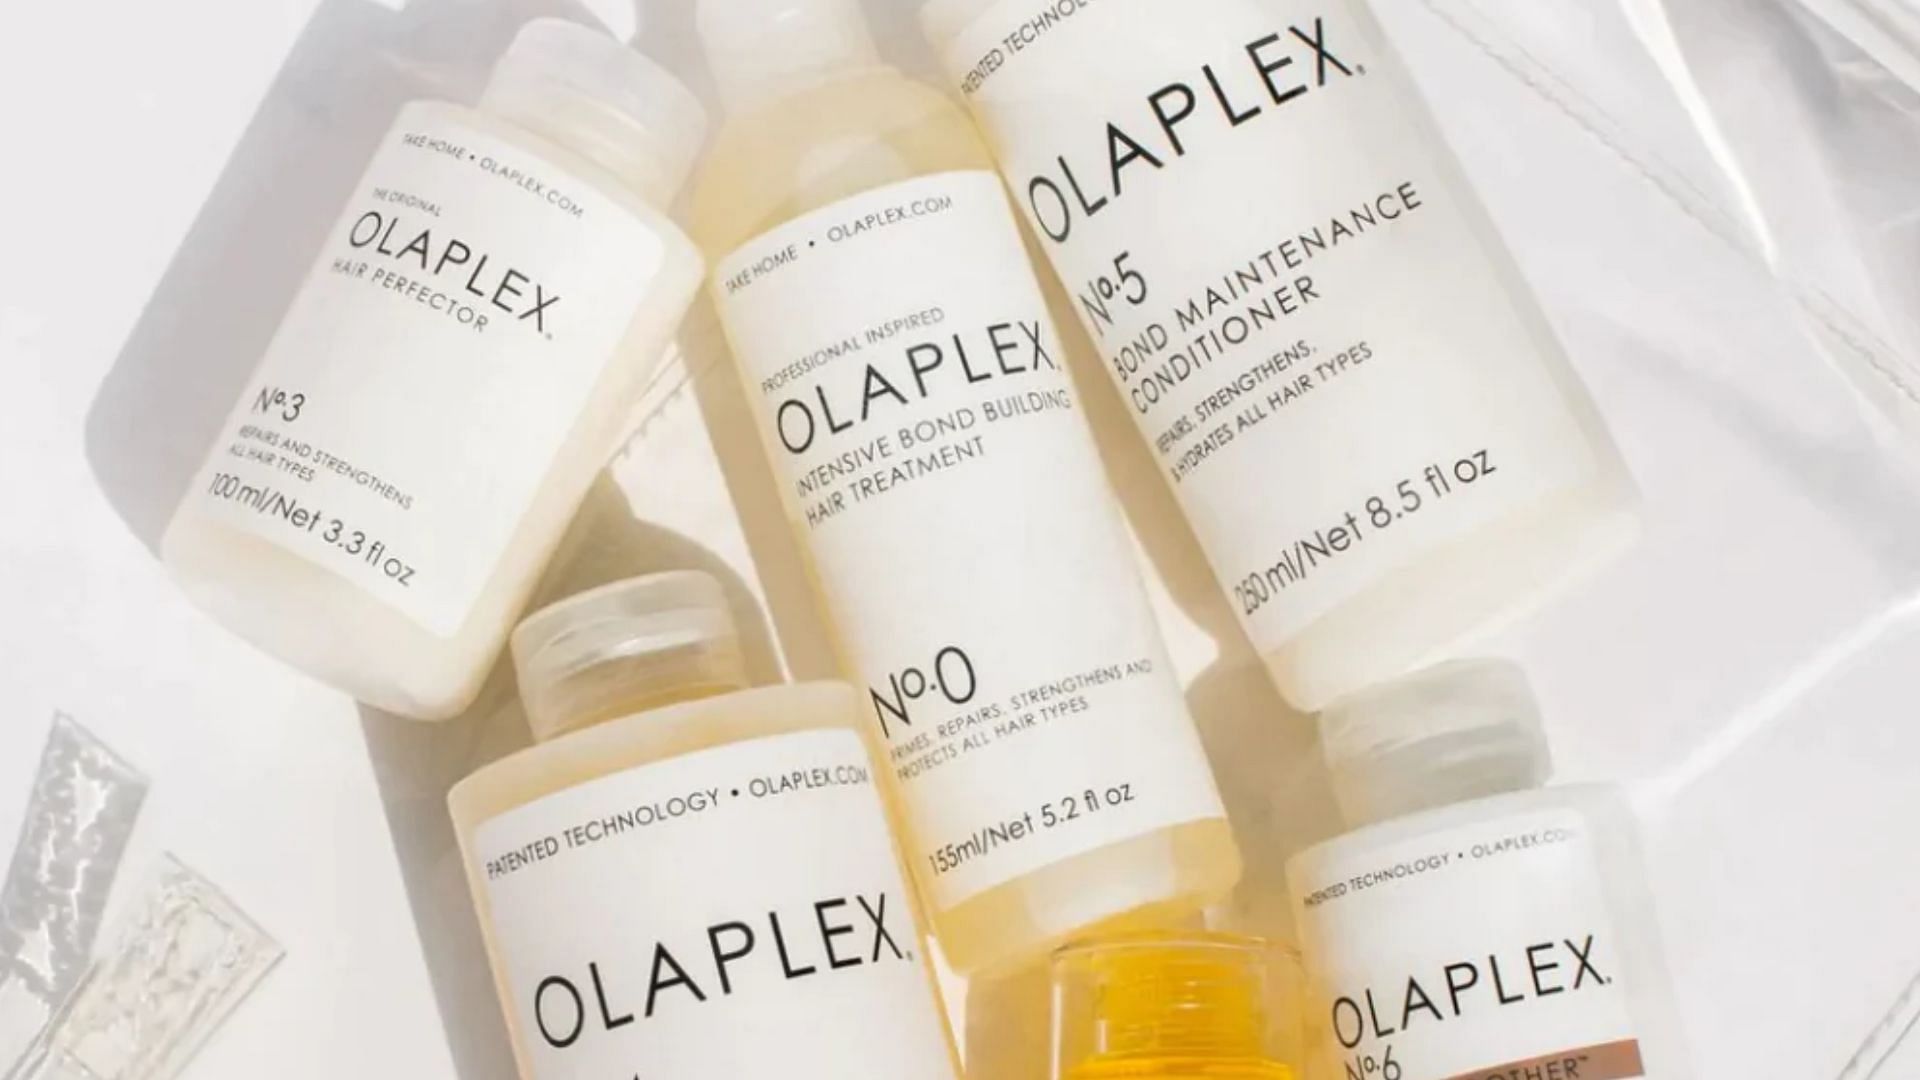 the lawsuit was filed against hair treatment ranging from No. 0 to No. 9 (Image via Olāplex)